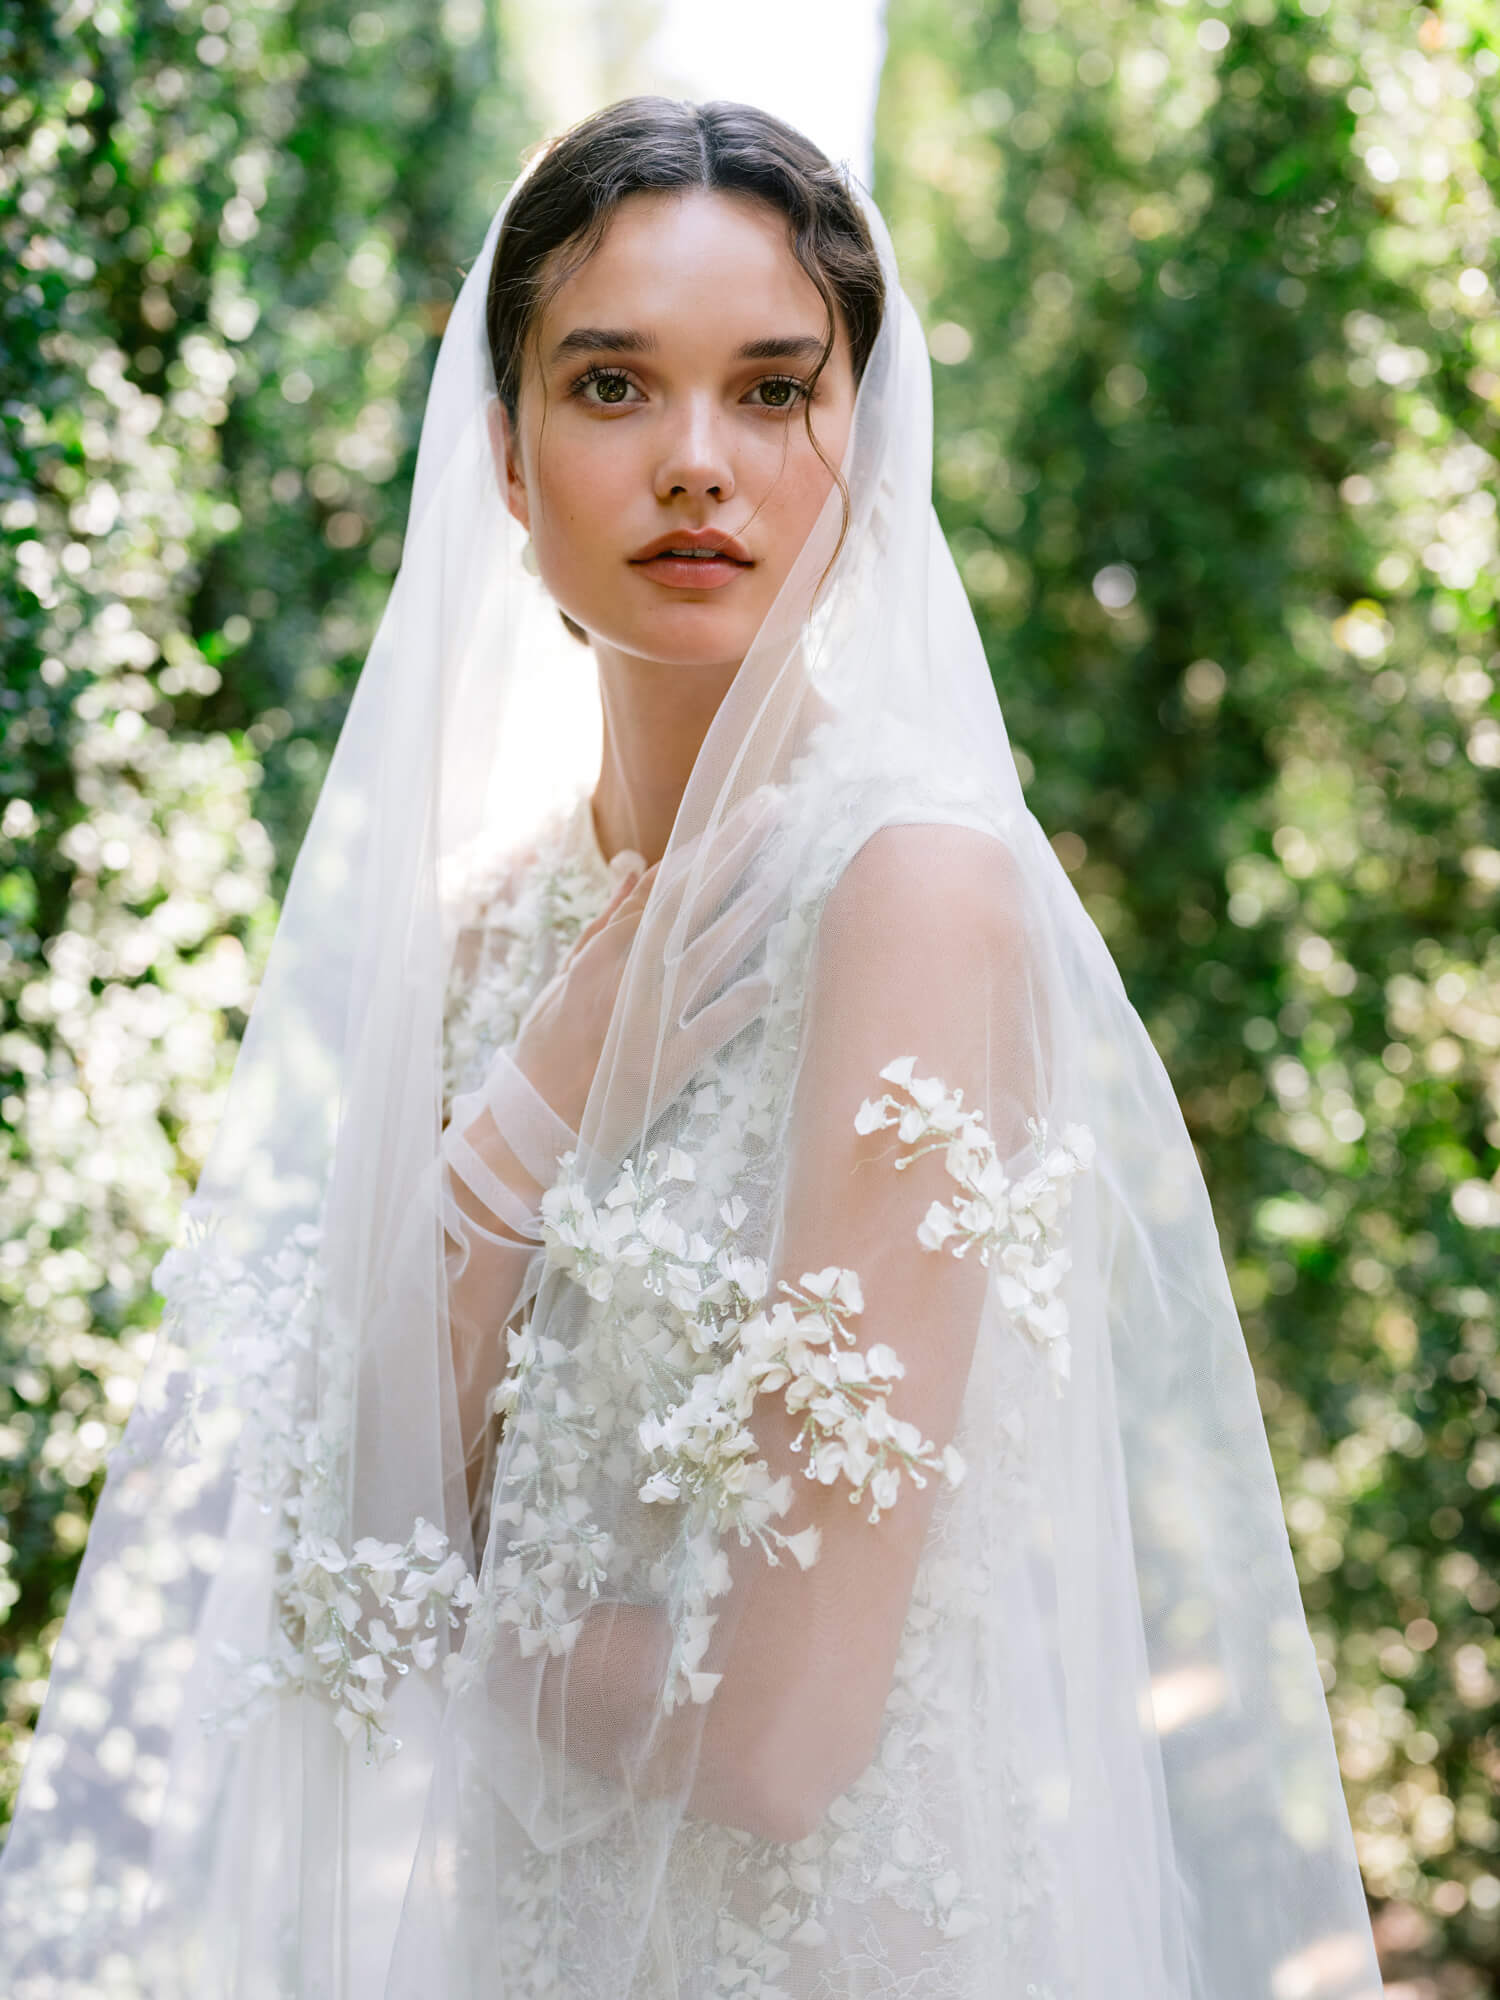 EXCLUSIVE: Monique Lhuillier and Hanky Panky Launch Bridal Collection